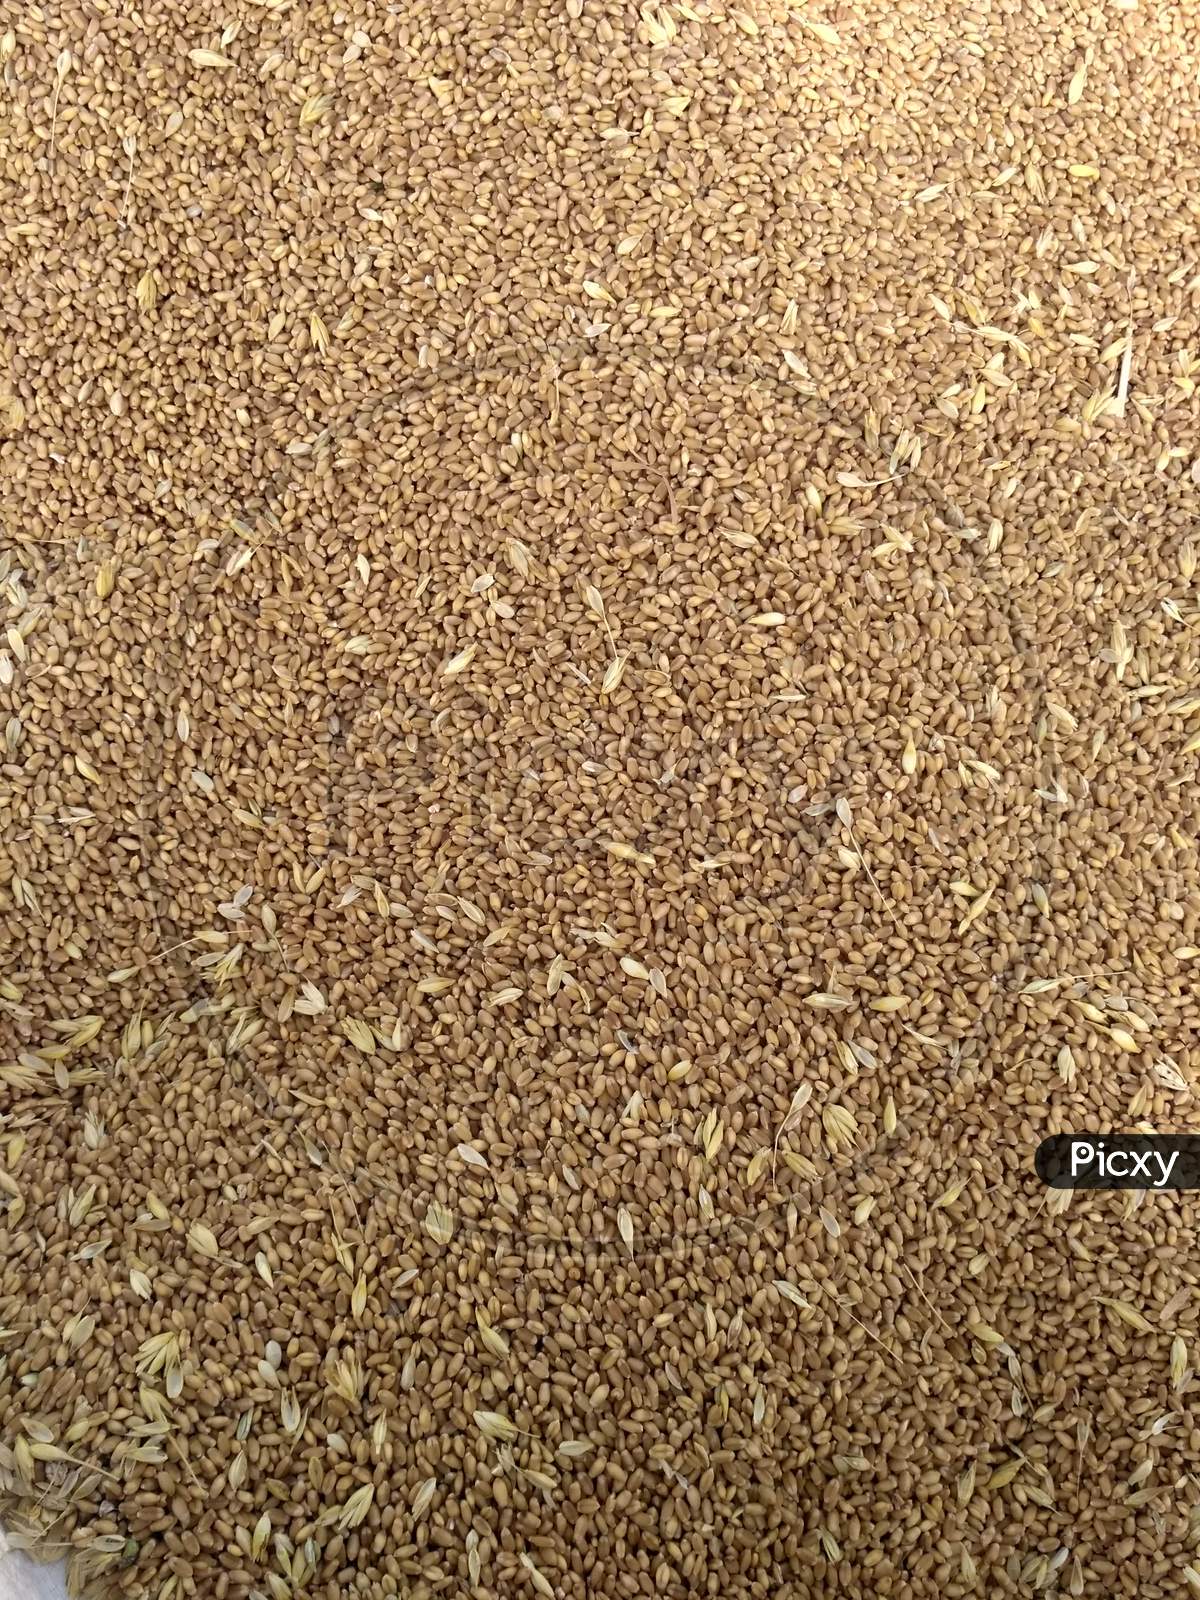 Seed Of Wheat, Wheat Grain As Background Texture